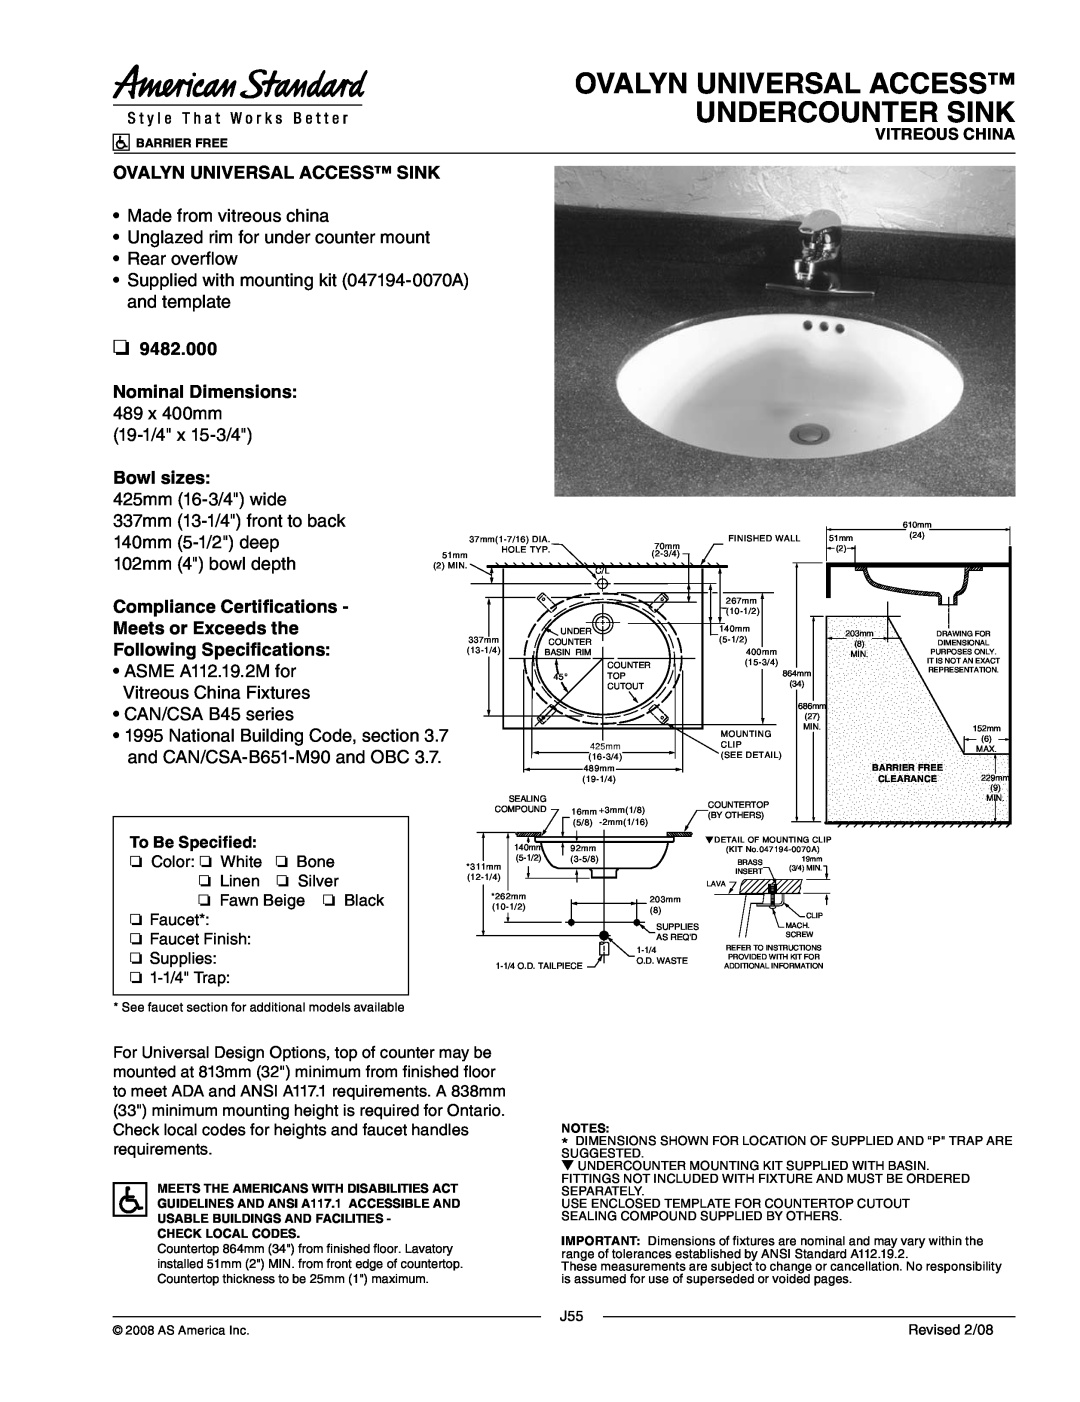 American Standard 9482.000 dimensions Ovalyn Universal Access Undercounter Sink, Ovalyn Universal Access Sink, Bowl sizes 